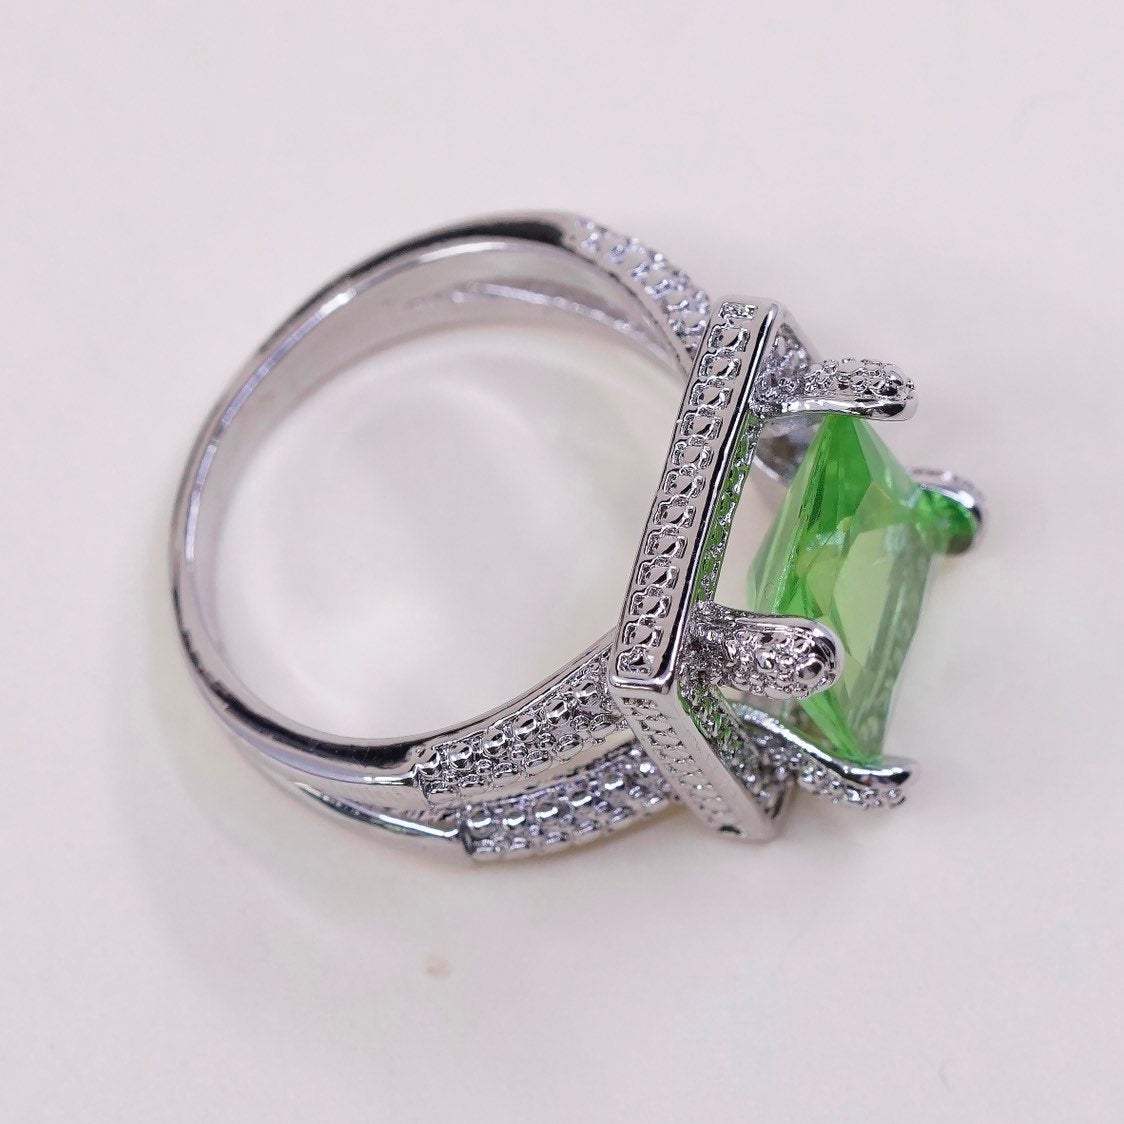 sz 8.25 sterling silver ring, platinum over 925 cocktail ring w/ green n Cz